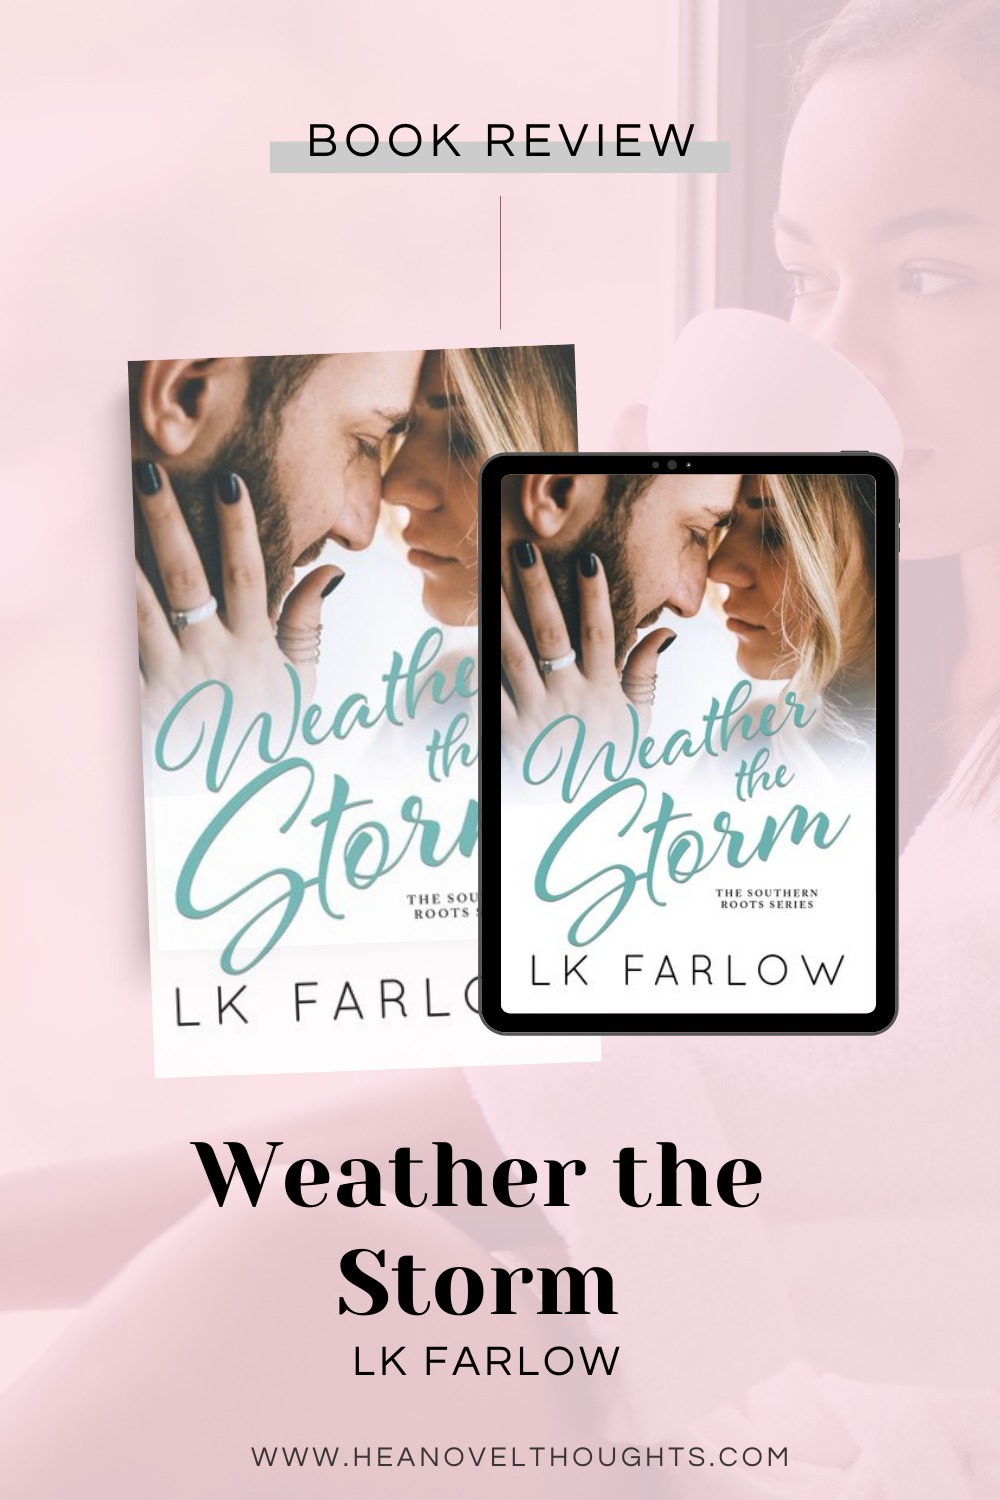 Weather the Storm by LK Farlow